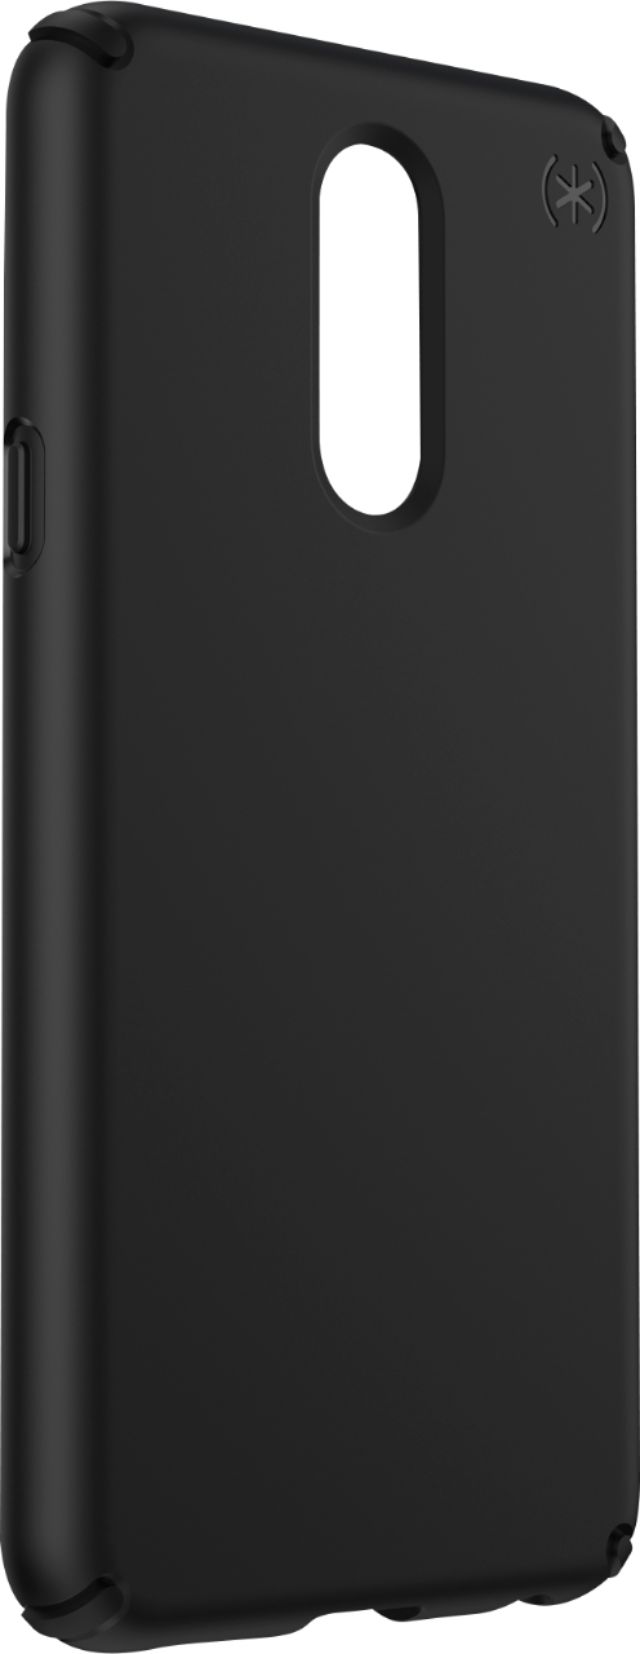 Angle View: Speck - Presidio LITE Case for Select LG Cell Phones - Black